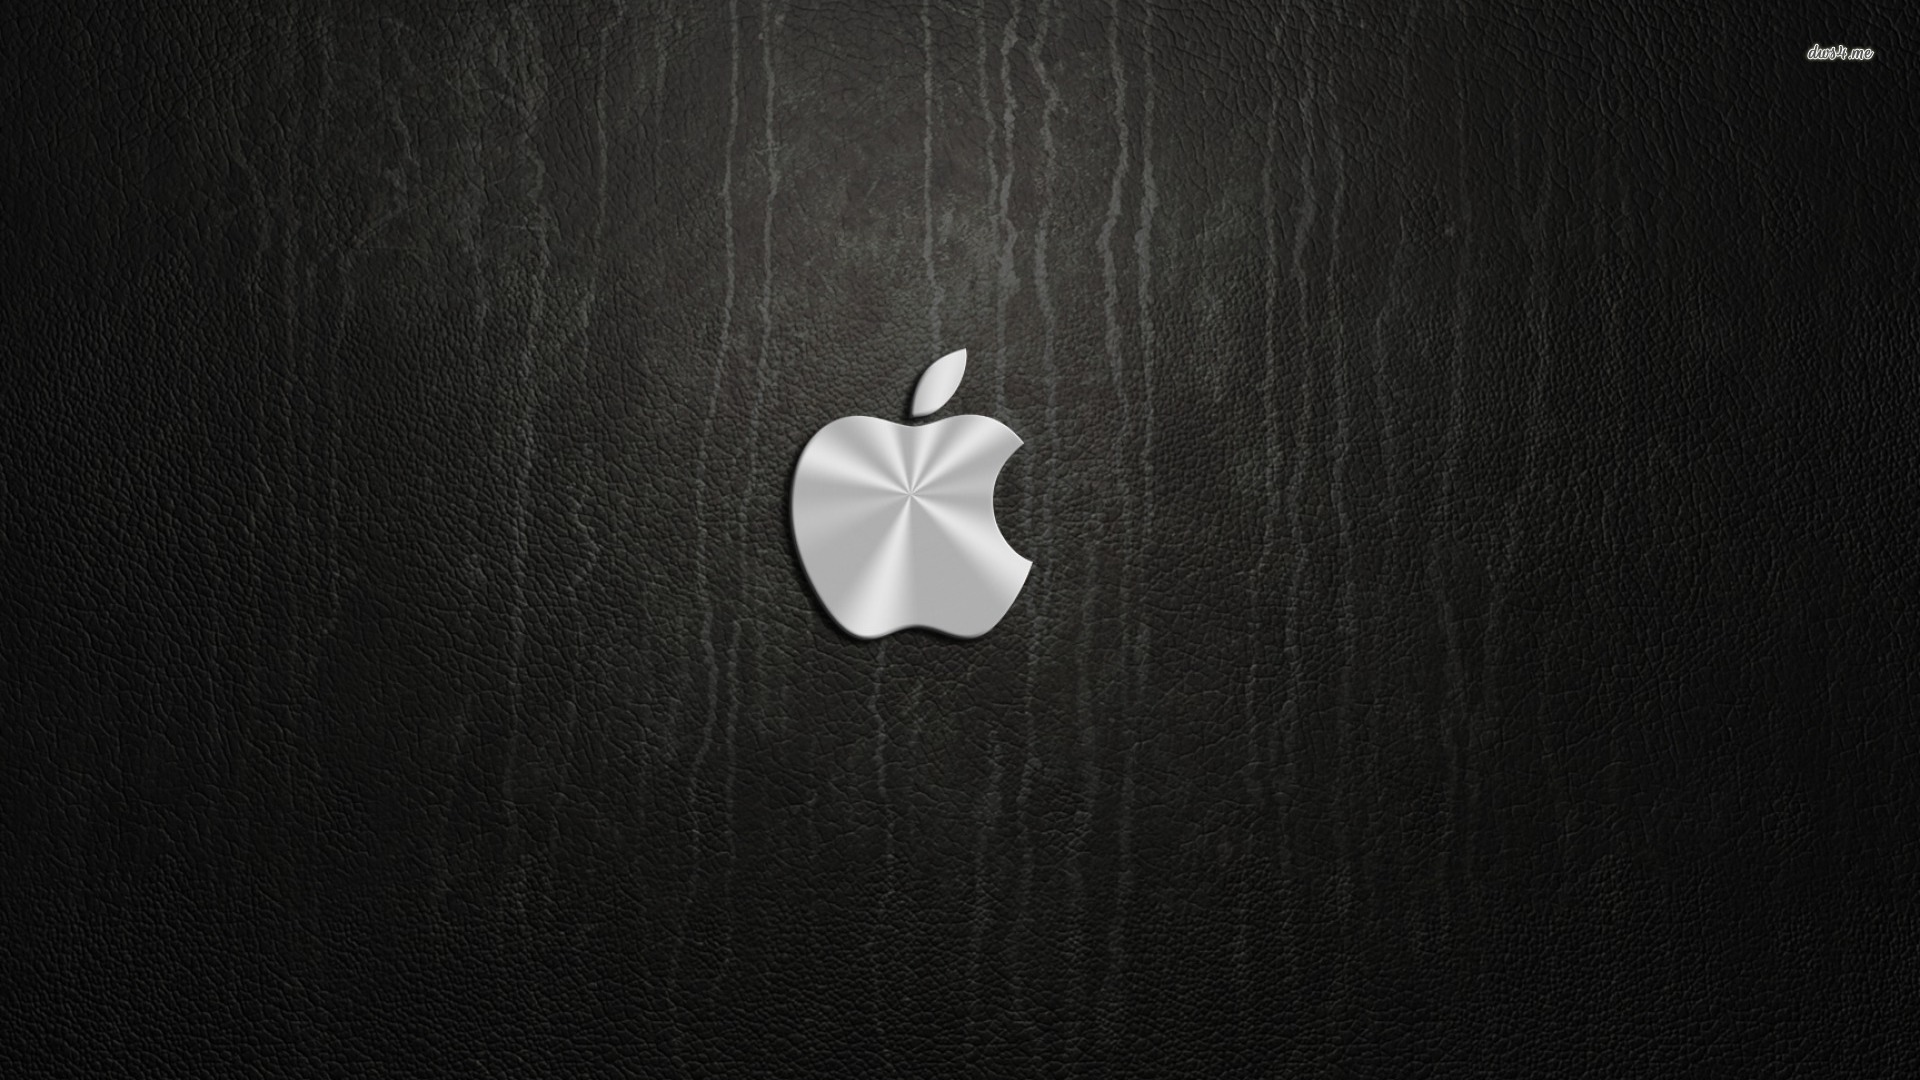 Silver Apple On Black Leather Wallpaper Puter